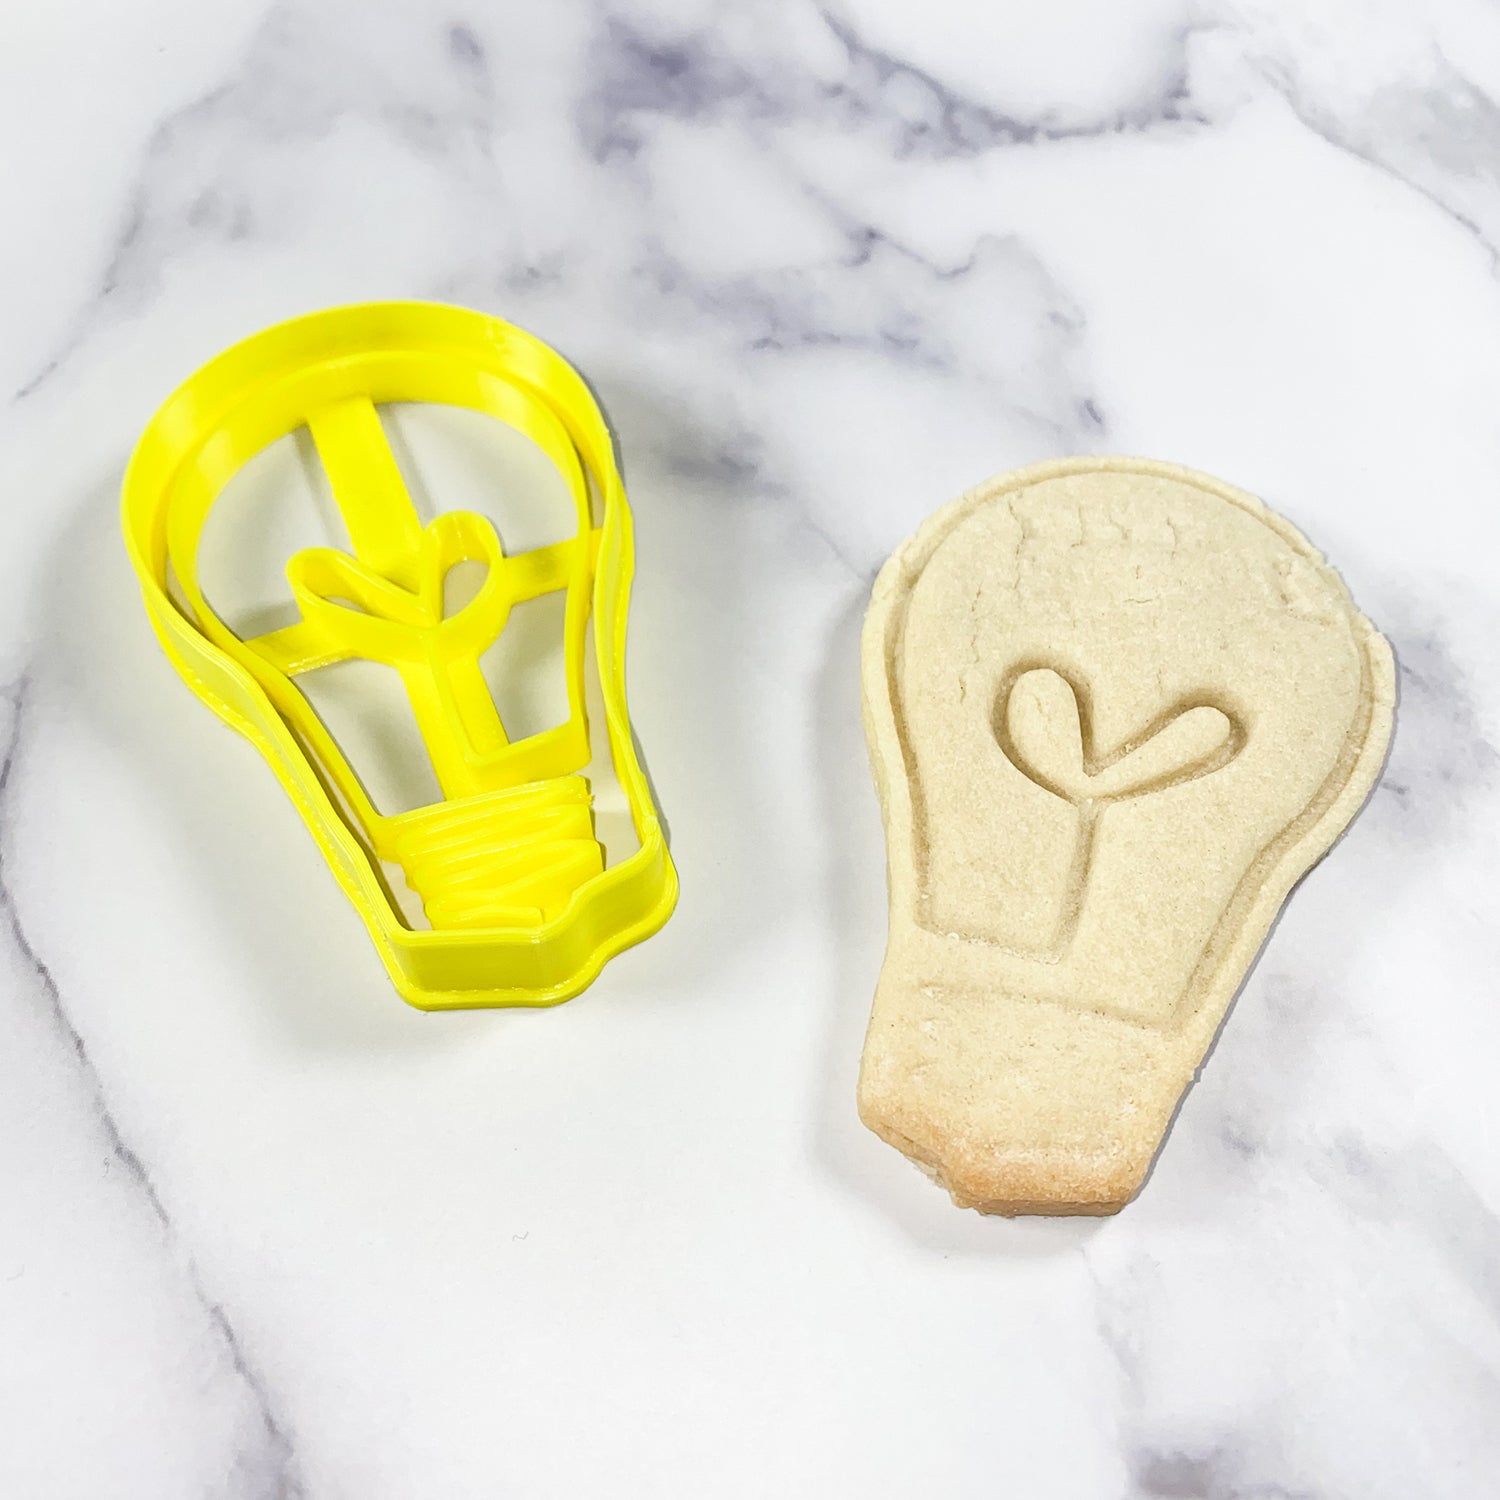 Lightbulb with Heart Cookie Cutter - USA made dough cut-out